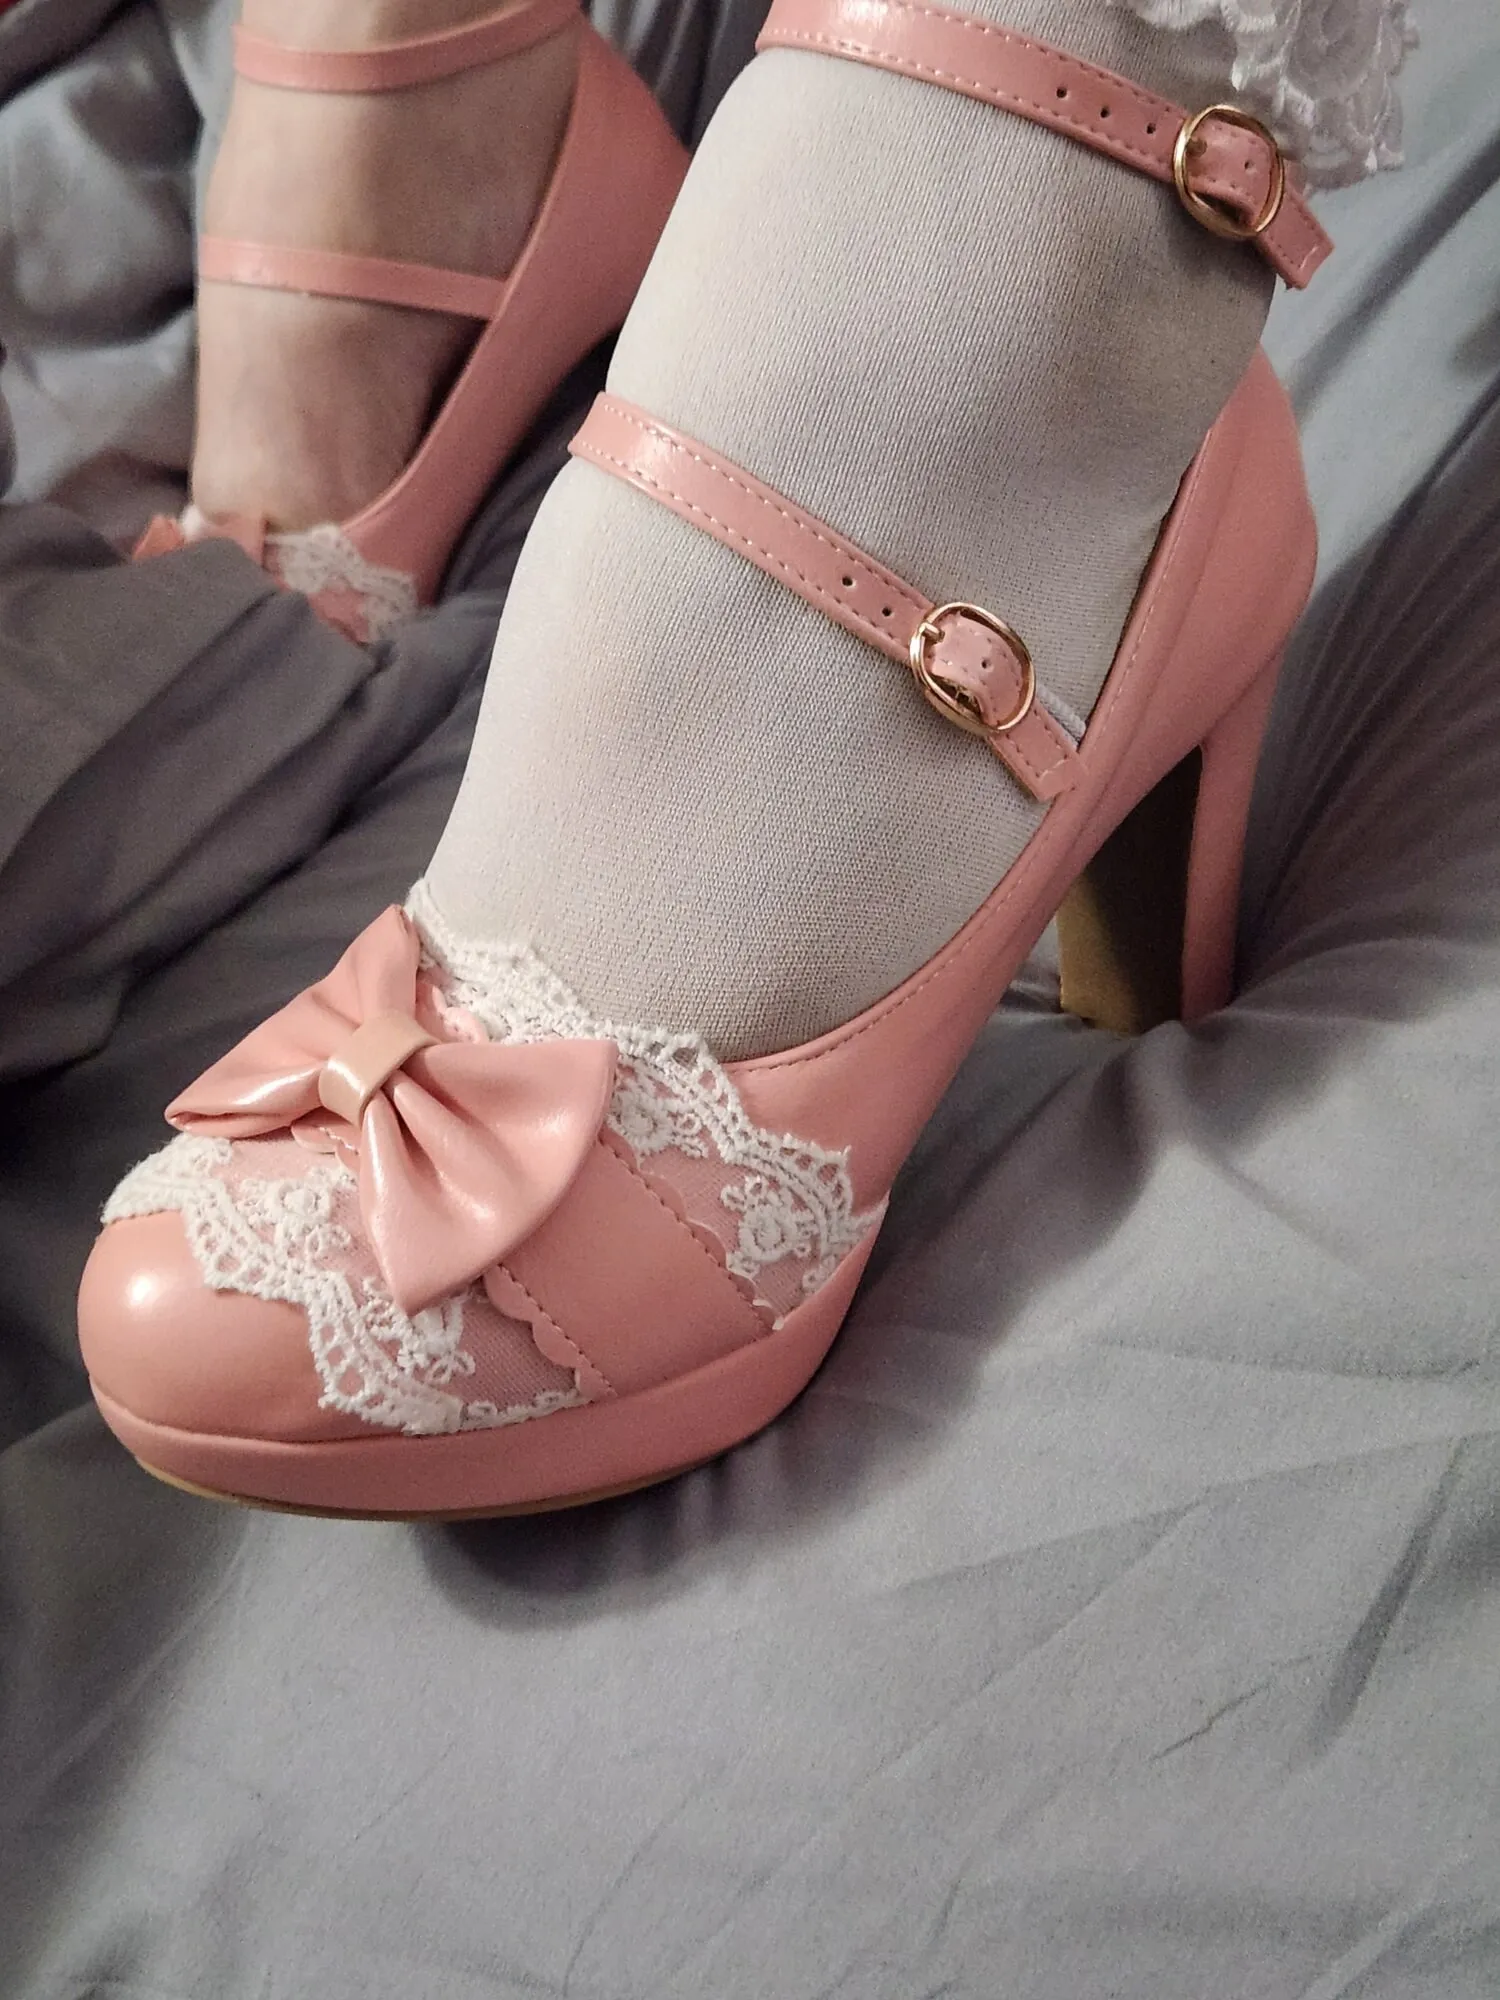 Cute new shoes from a fan.